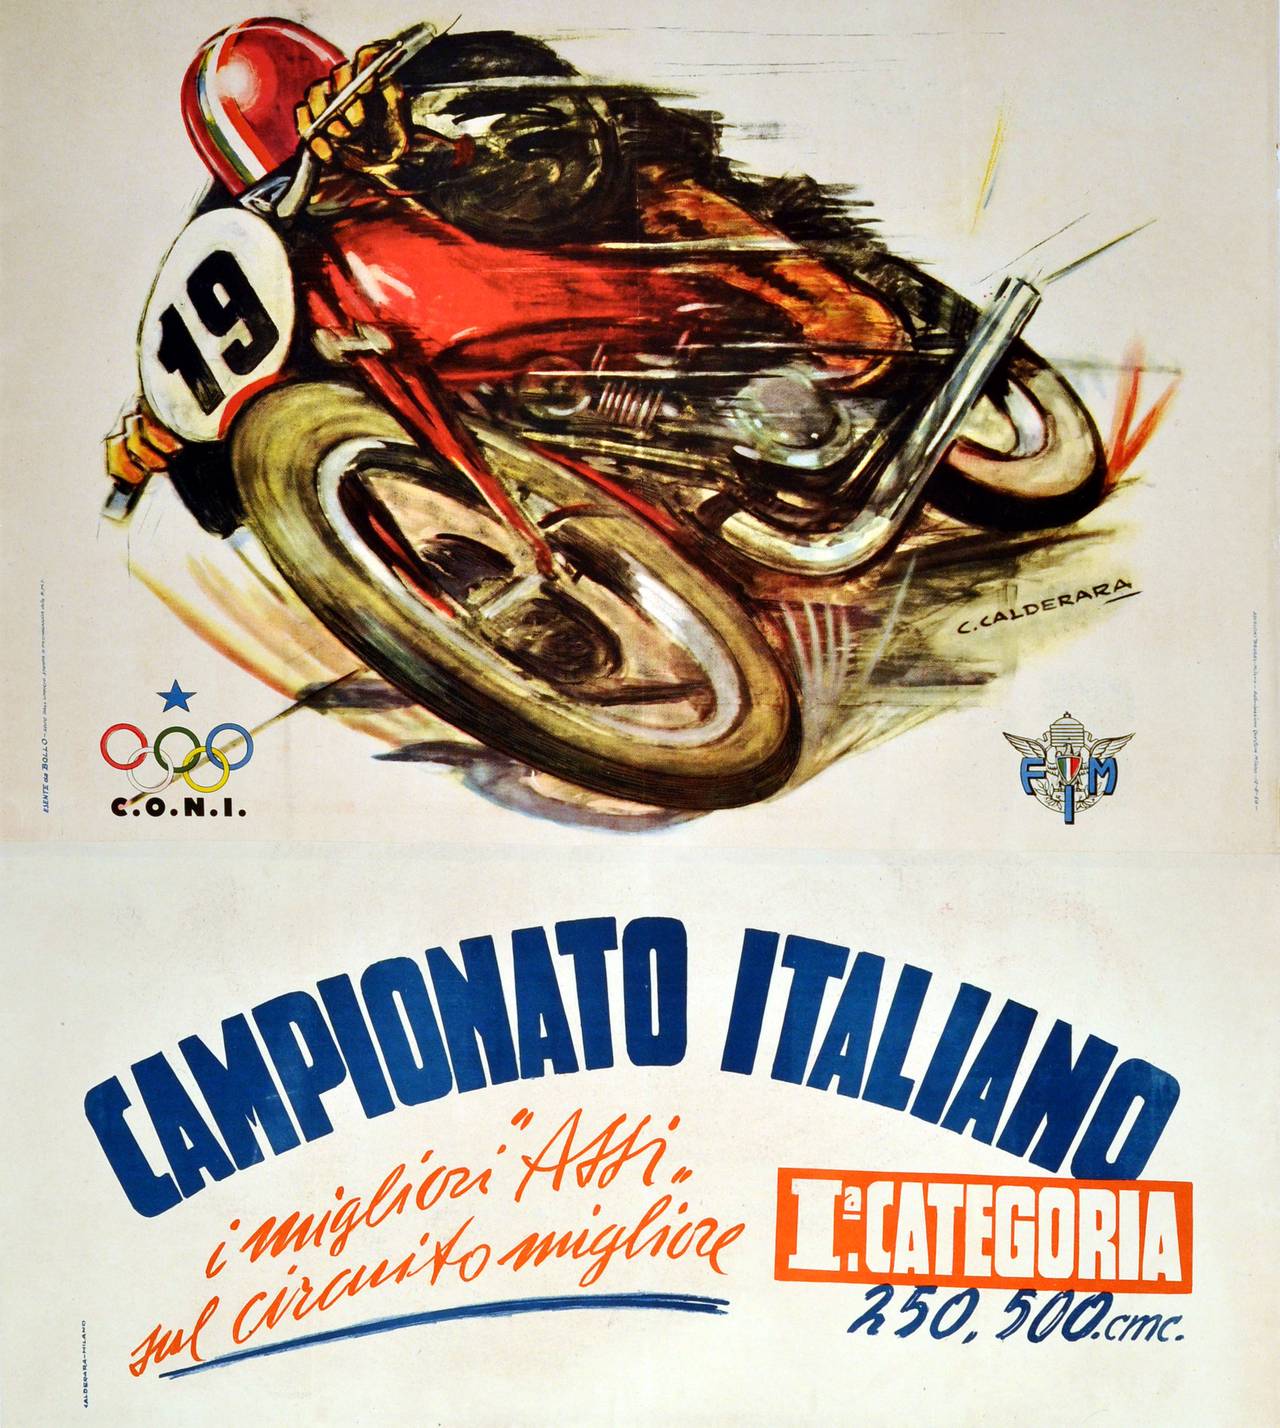 Unknown Print - Large Original Vintage Motorcycling Poster for the Italian Championships 1950